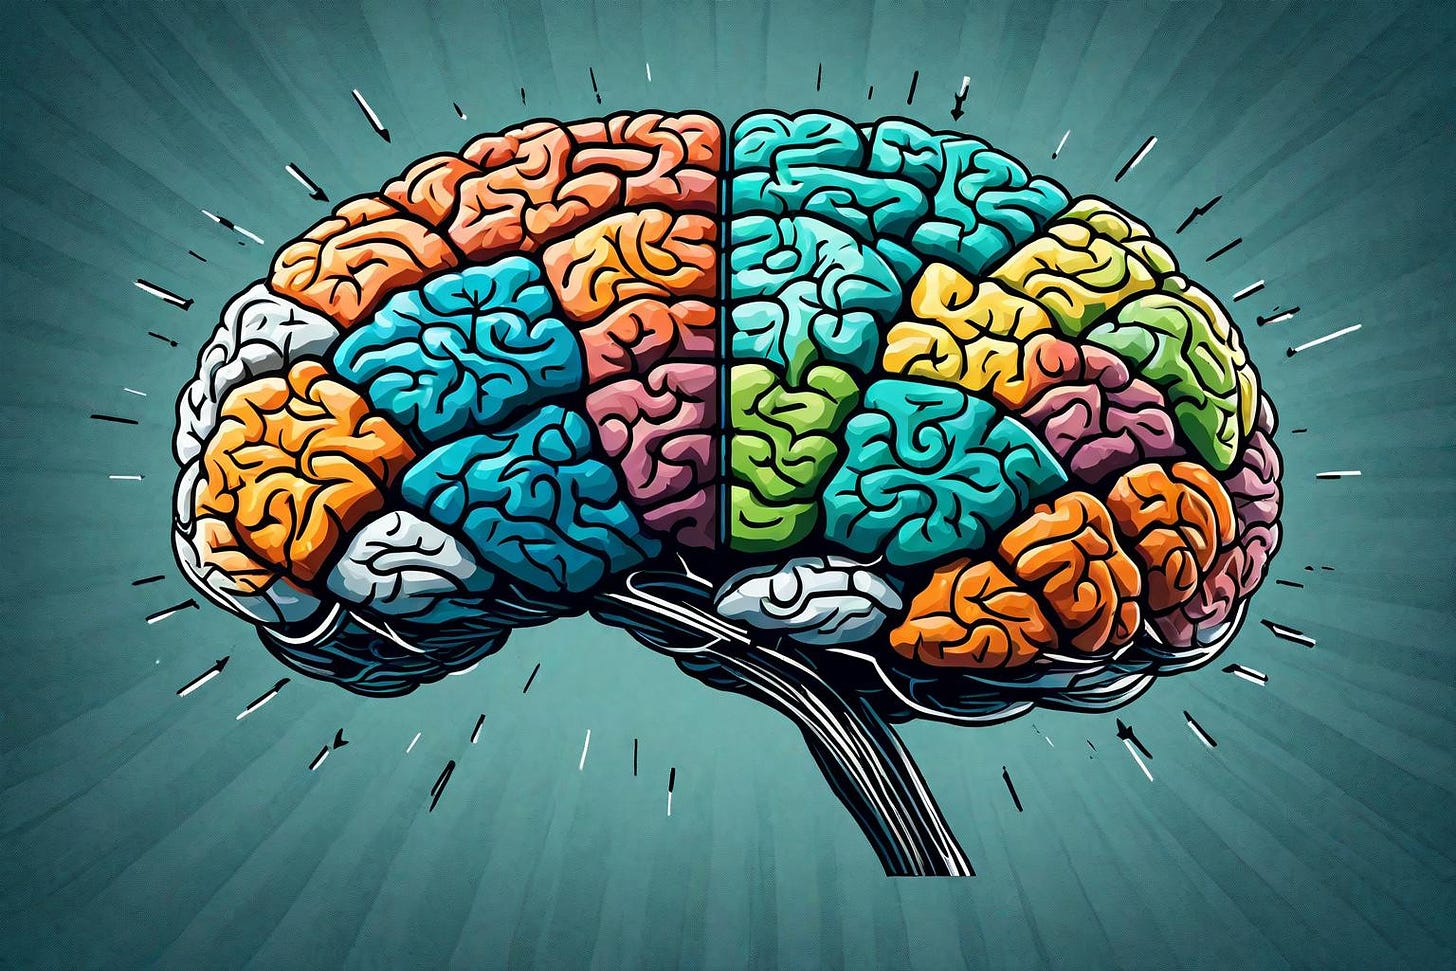 A brain divided into sections, with one side representing the rapid, fragmented information from short-form videos and the other representing the deeper, analytical thinking fostered by critical thinking.